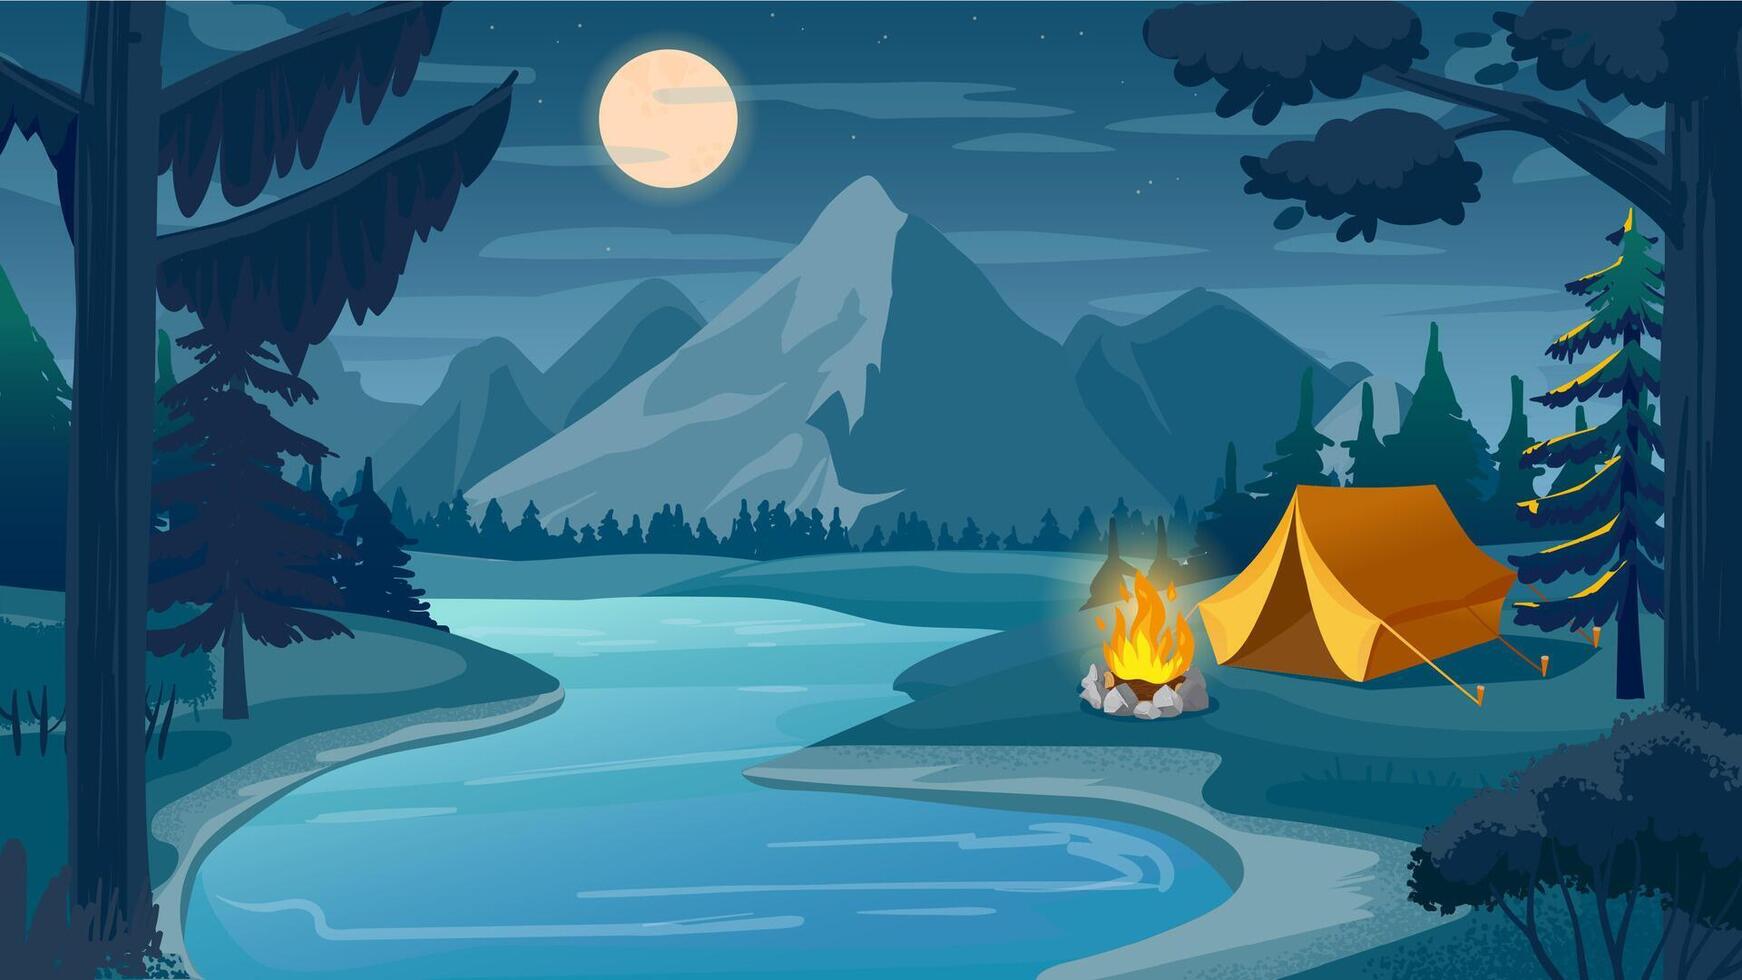 Mountain night camping. Cartoon forest landscape with lake, tent and campfire, sky with moon. Hiking adventure, nature tourism vector scene